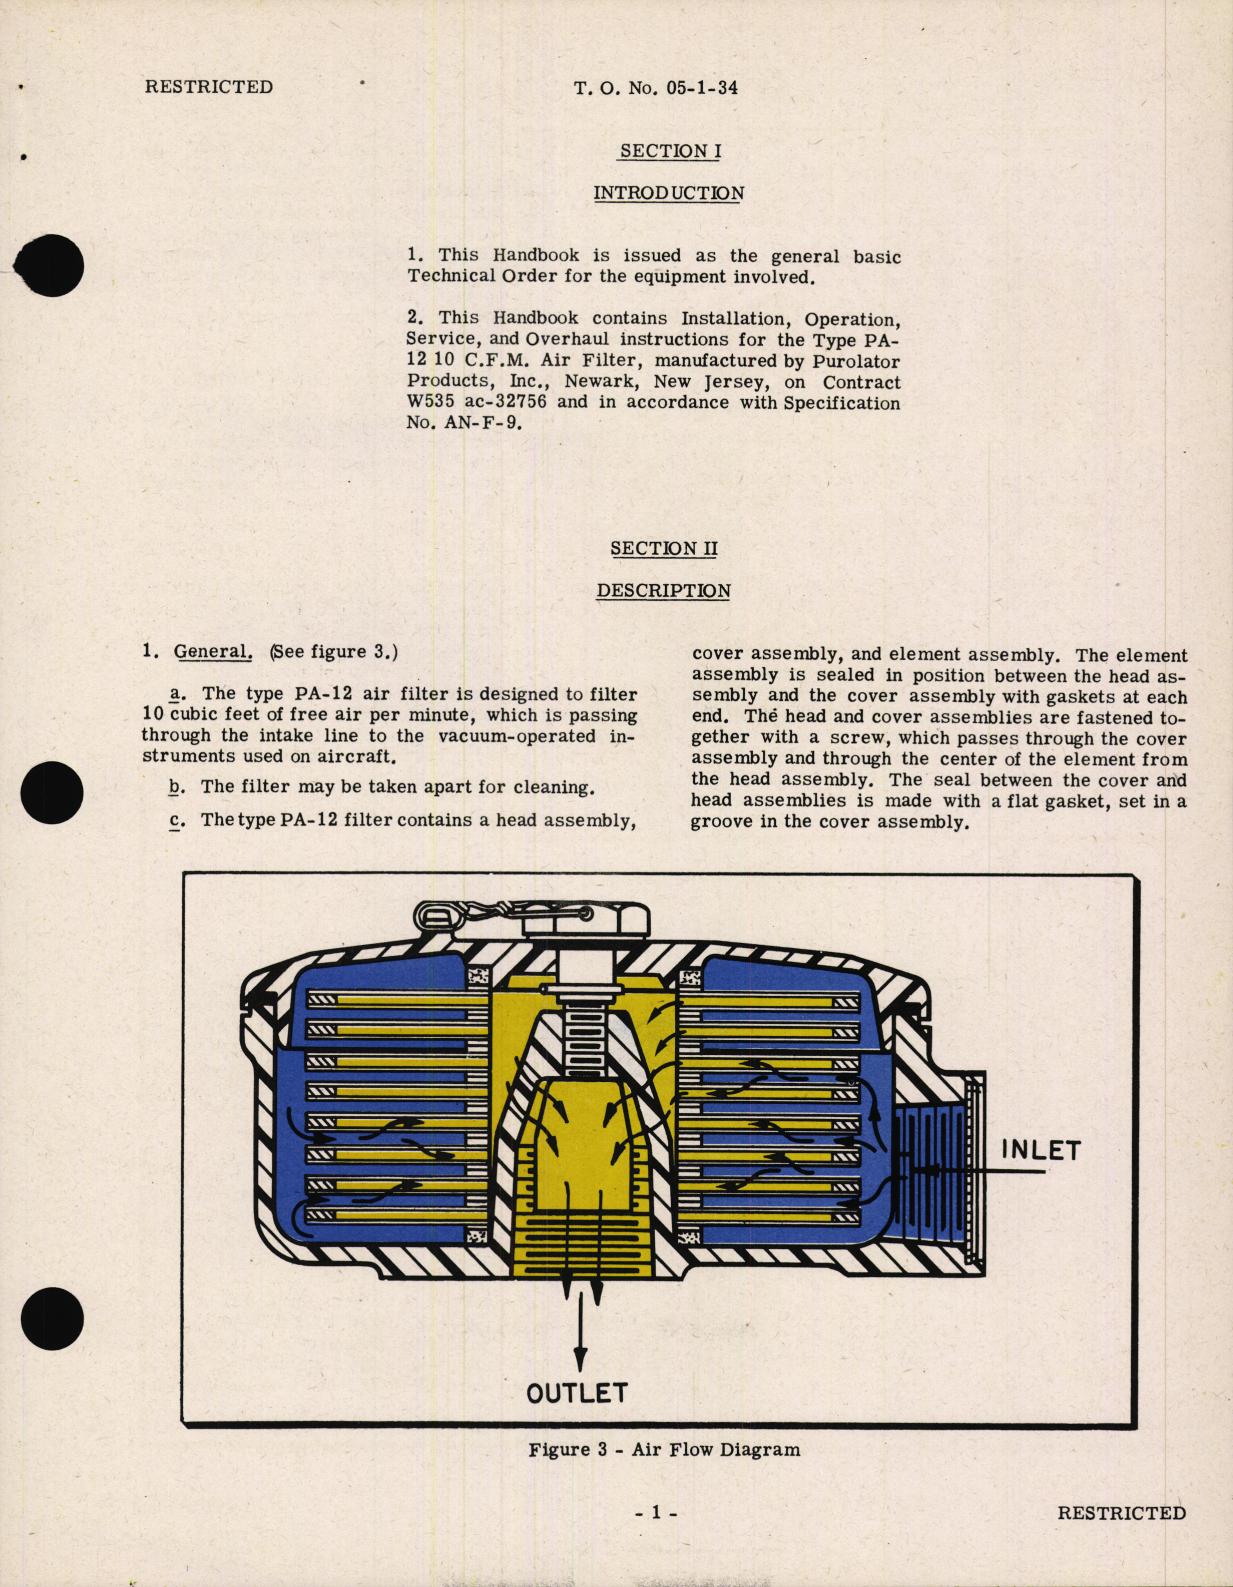 Sample page 5 from AirCorps Library document: Handbook of Instructions with Parts Catalog for Type PA-12 Air Filter